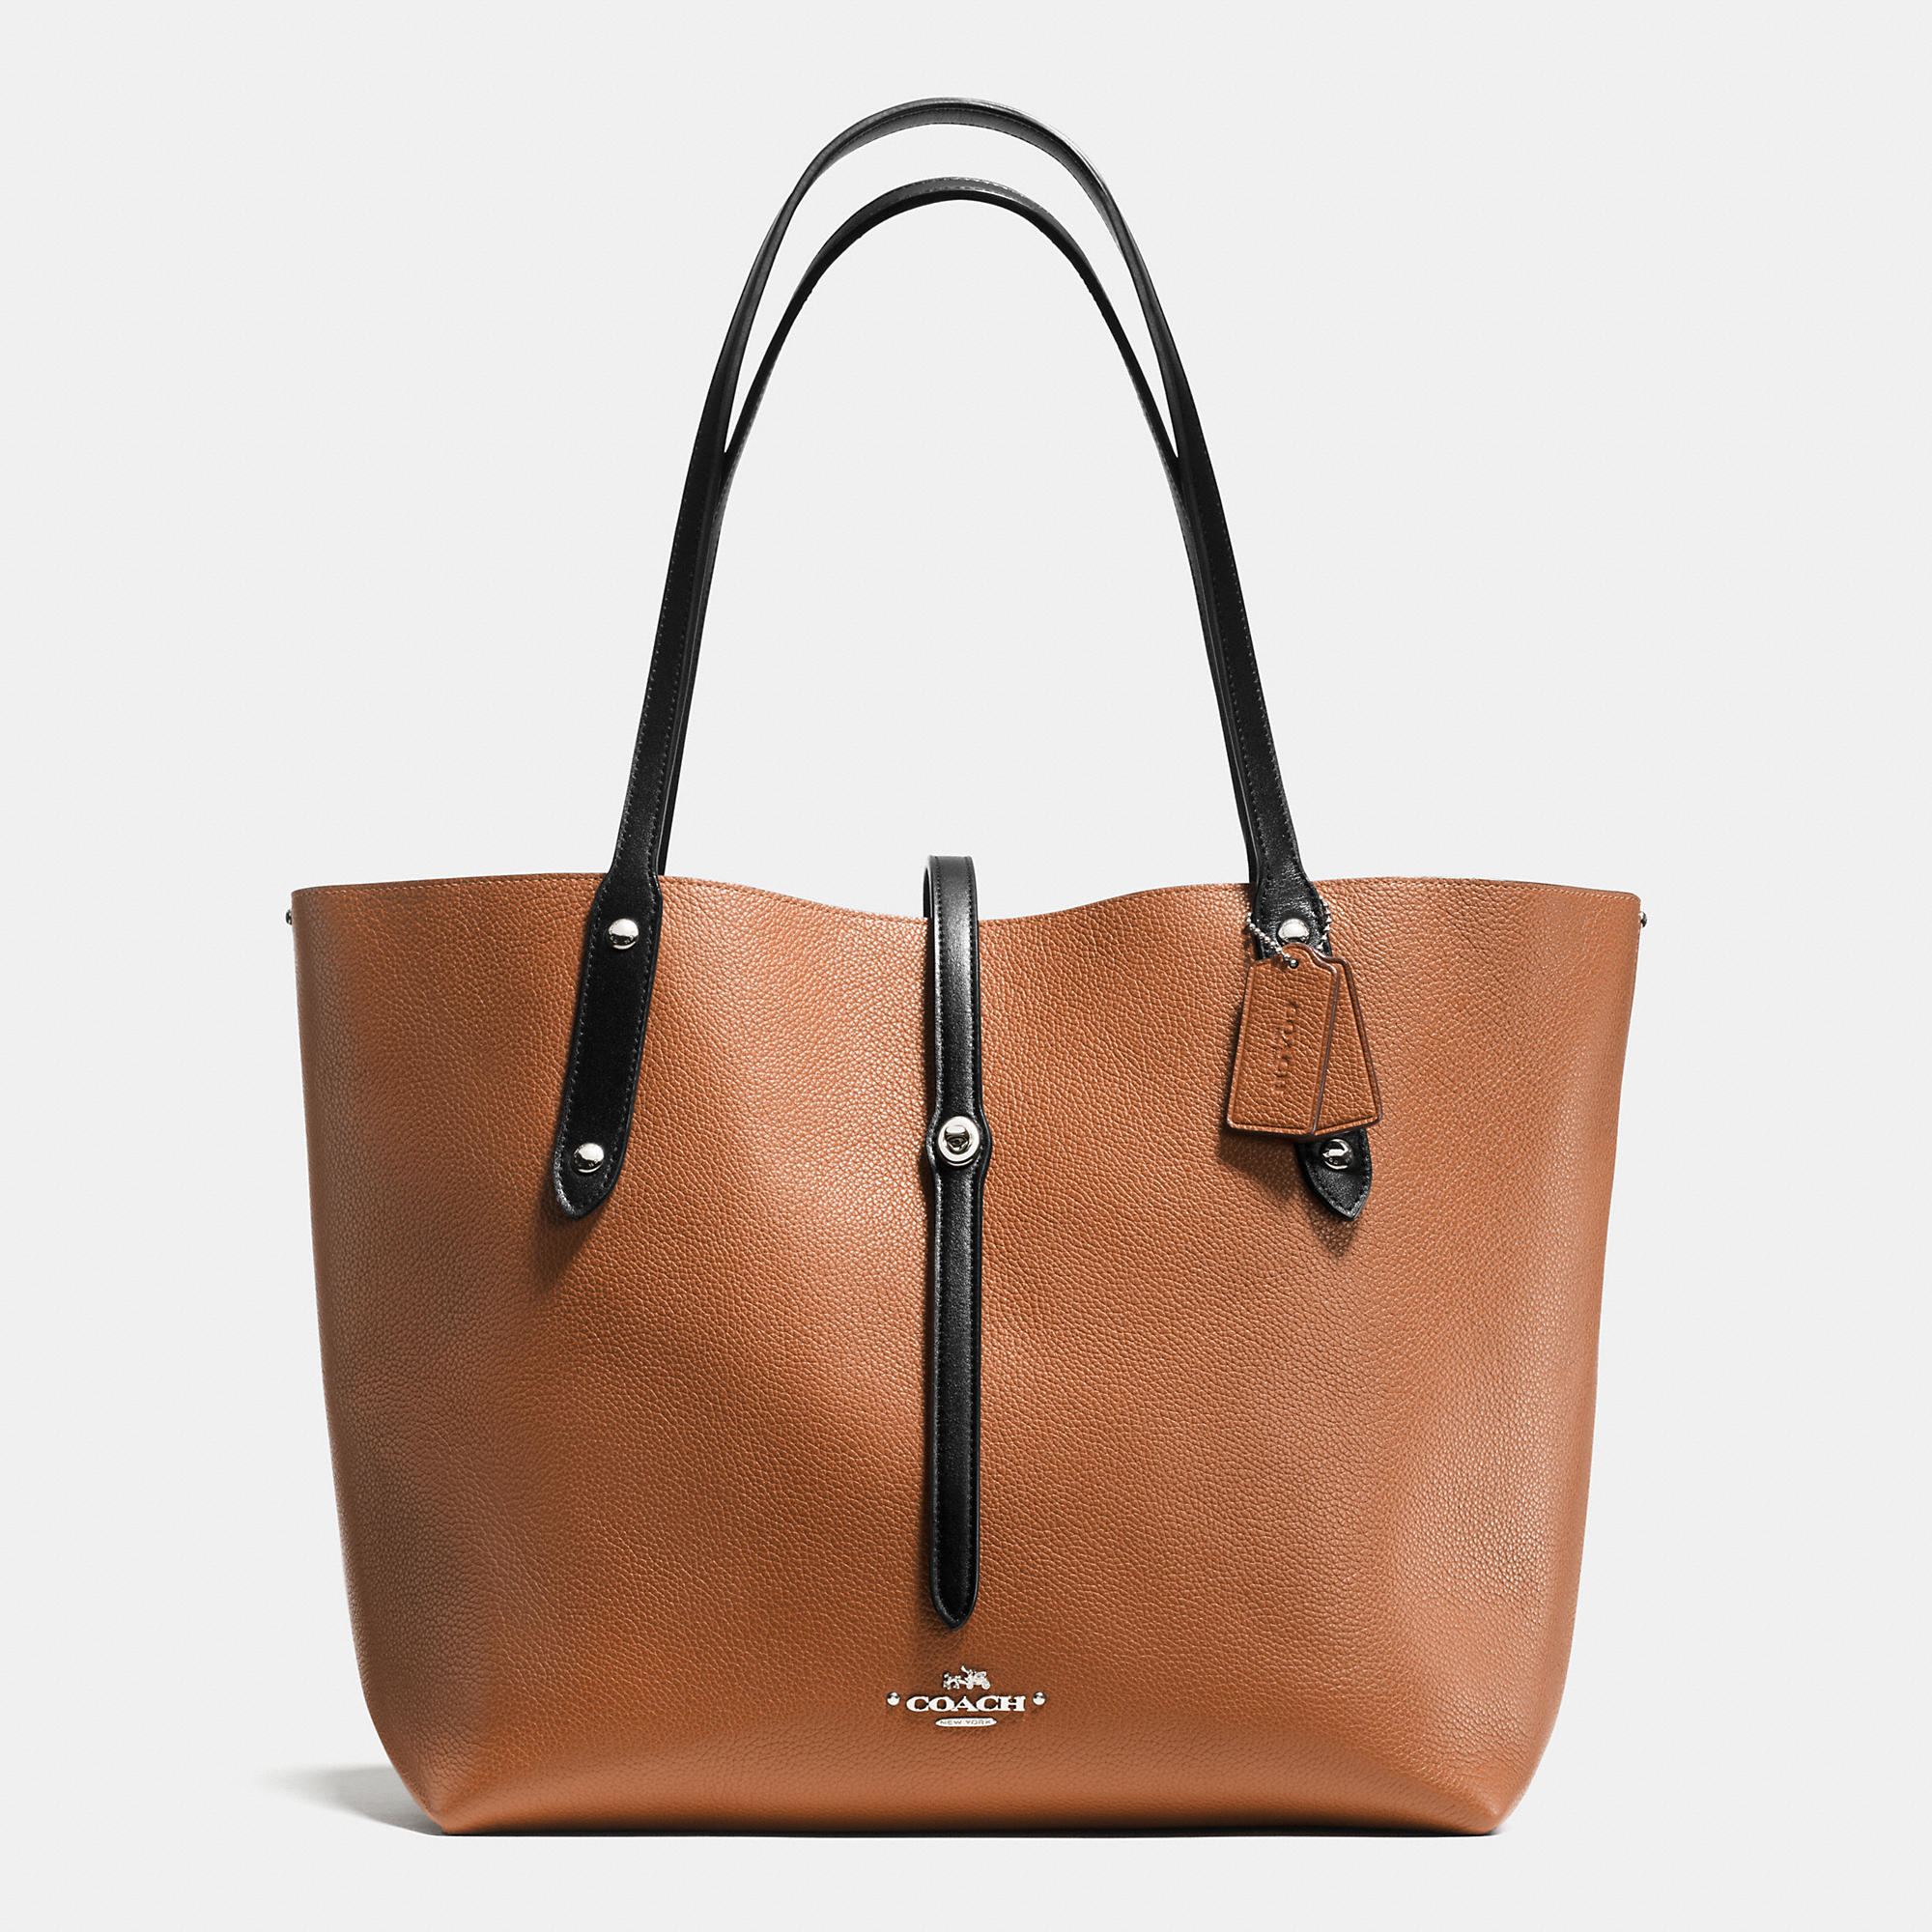 Lyst - Coach Market Tote In Refined Pebble Leather in Metallic